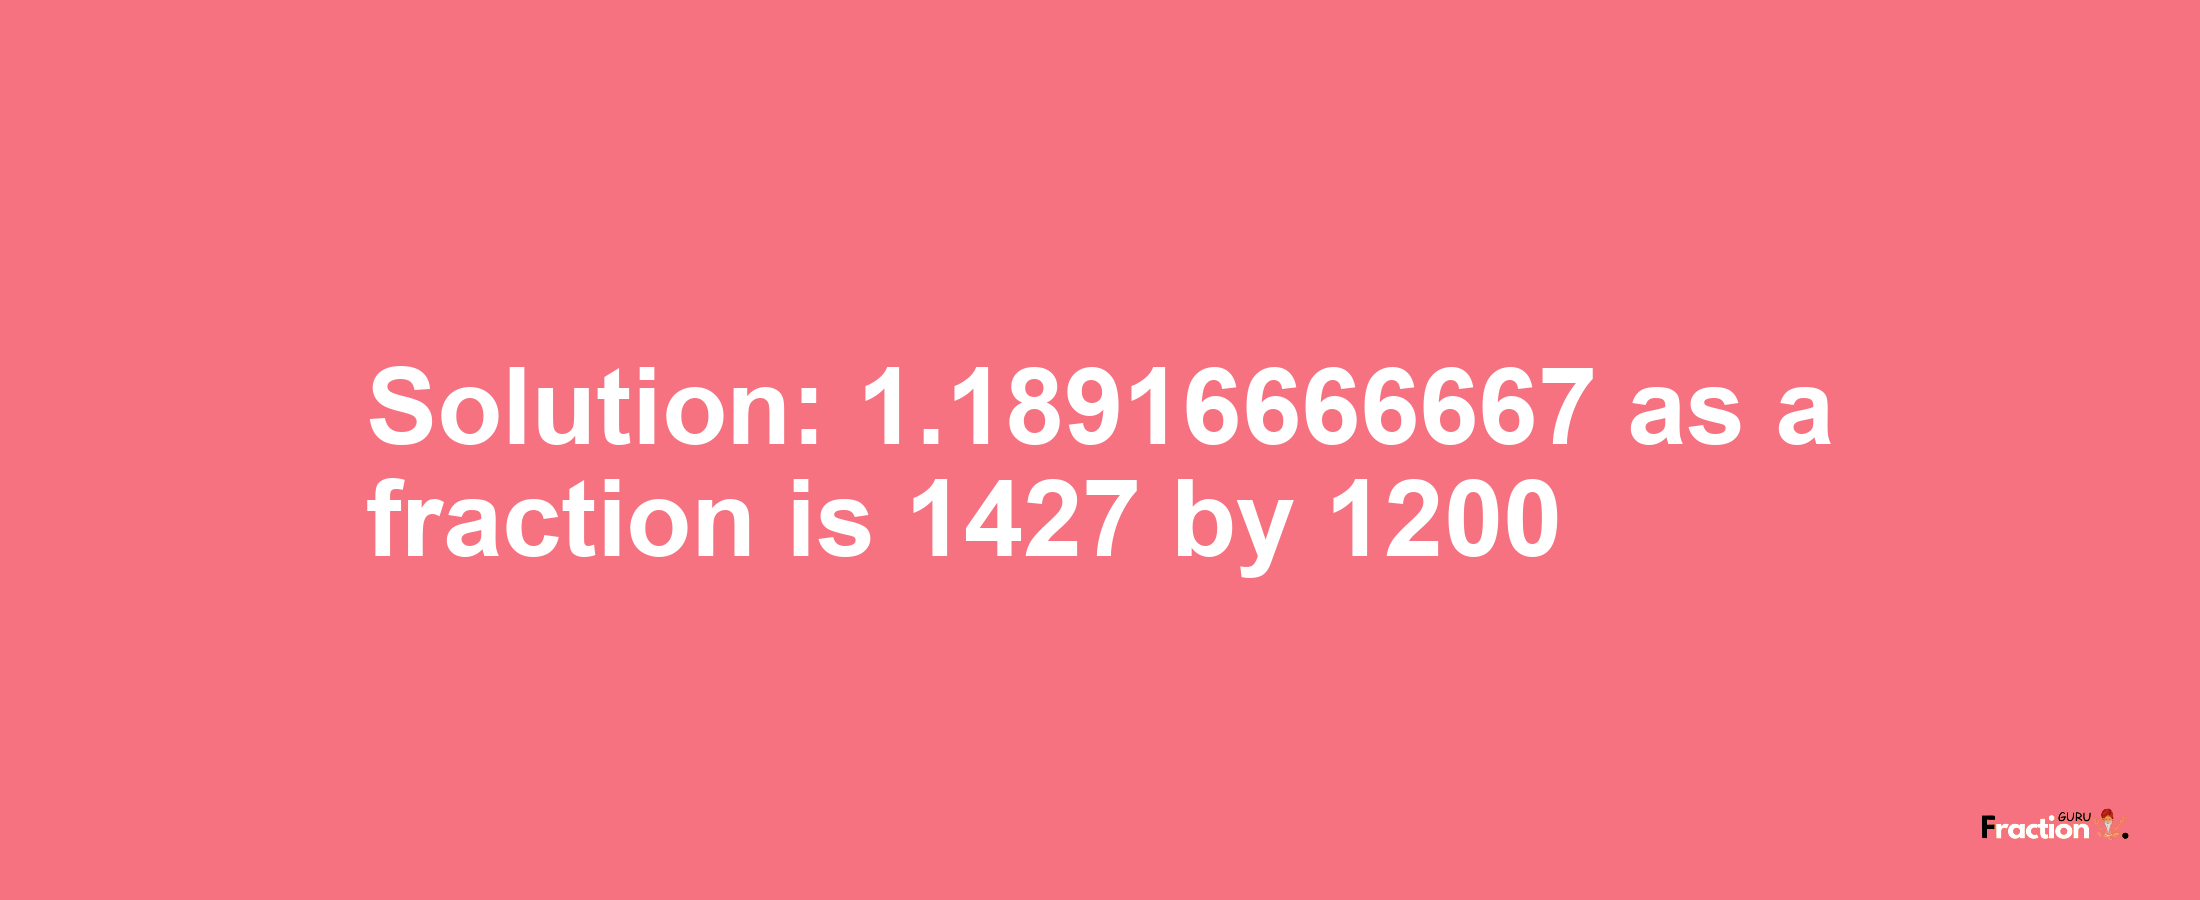 Solution:1.18916666667 as a fraction is 1427/1200